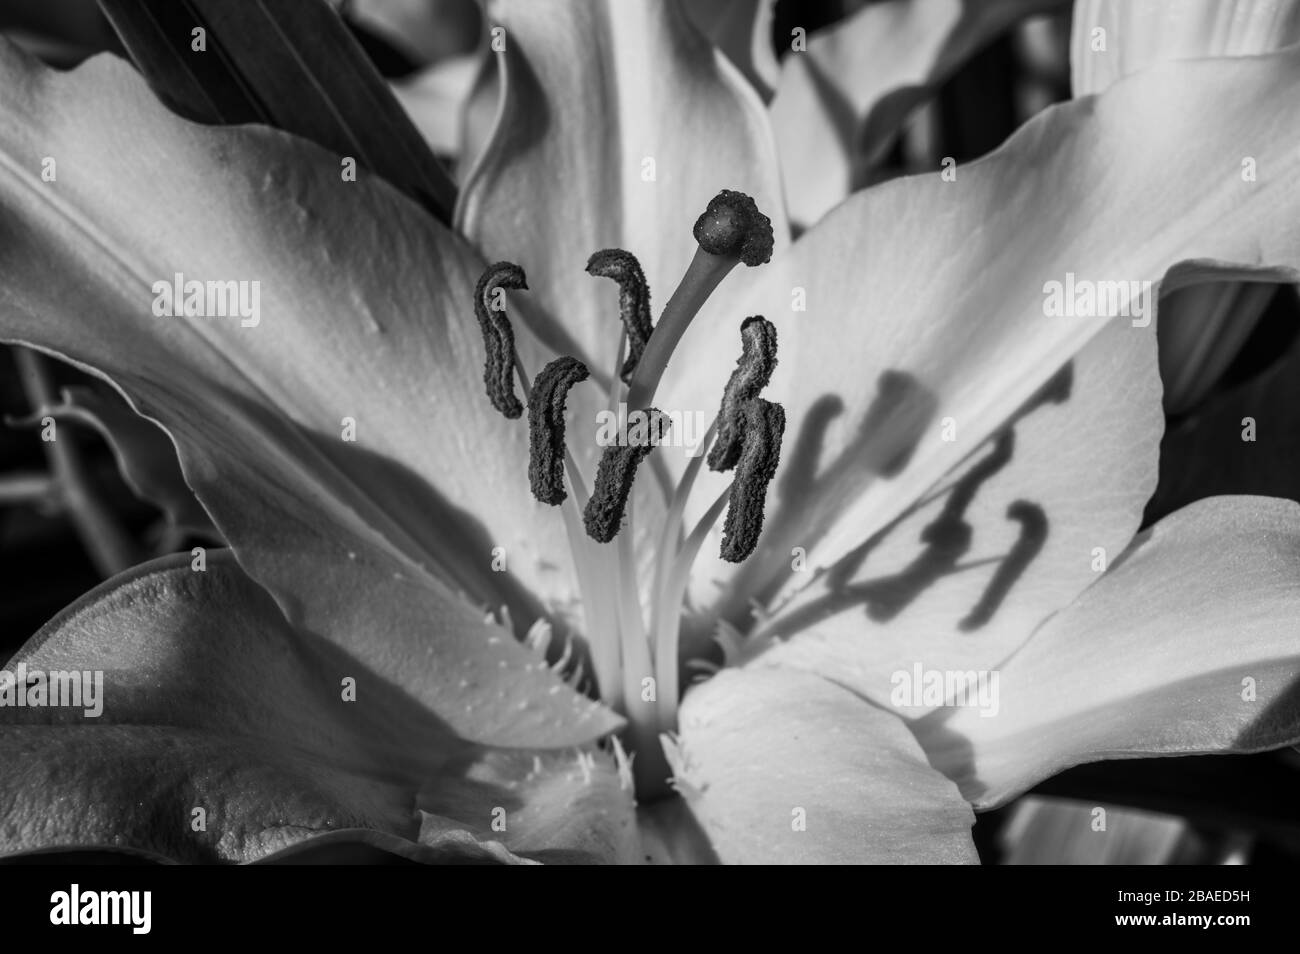 Black and white closeup of a white lily flower's stigma, style, stamens, filaments and petals in direct sunlight creating shadows. Stock Photo